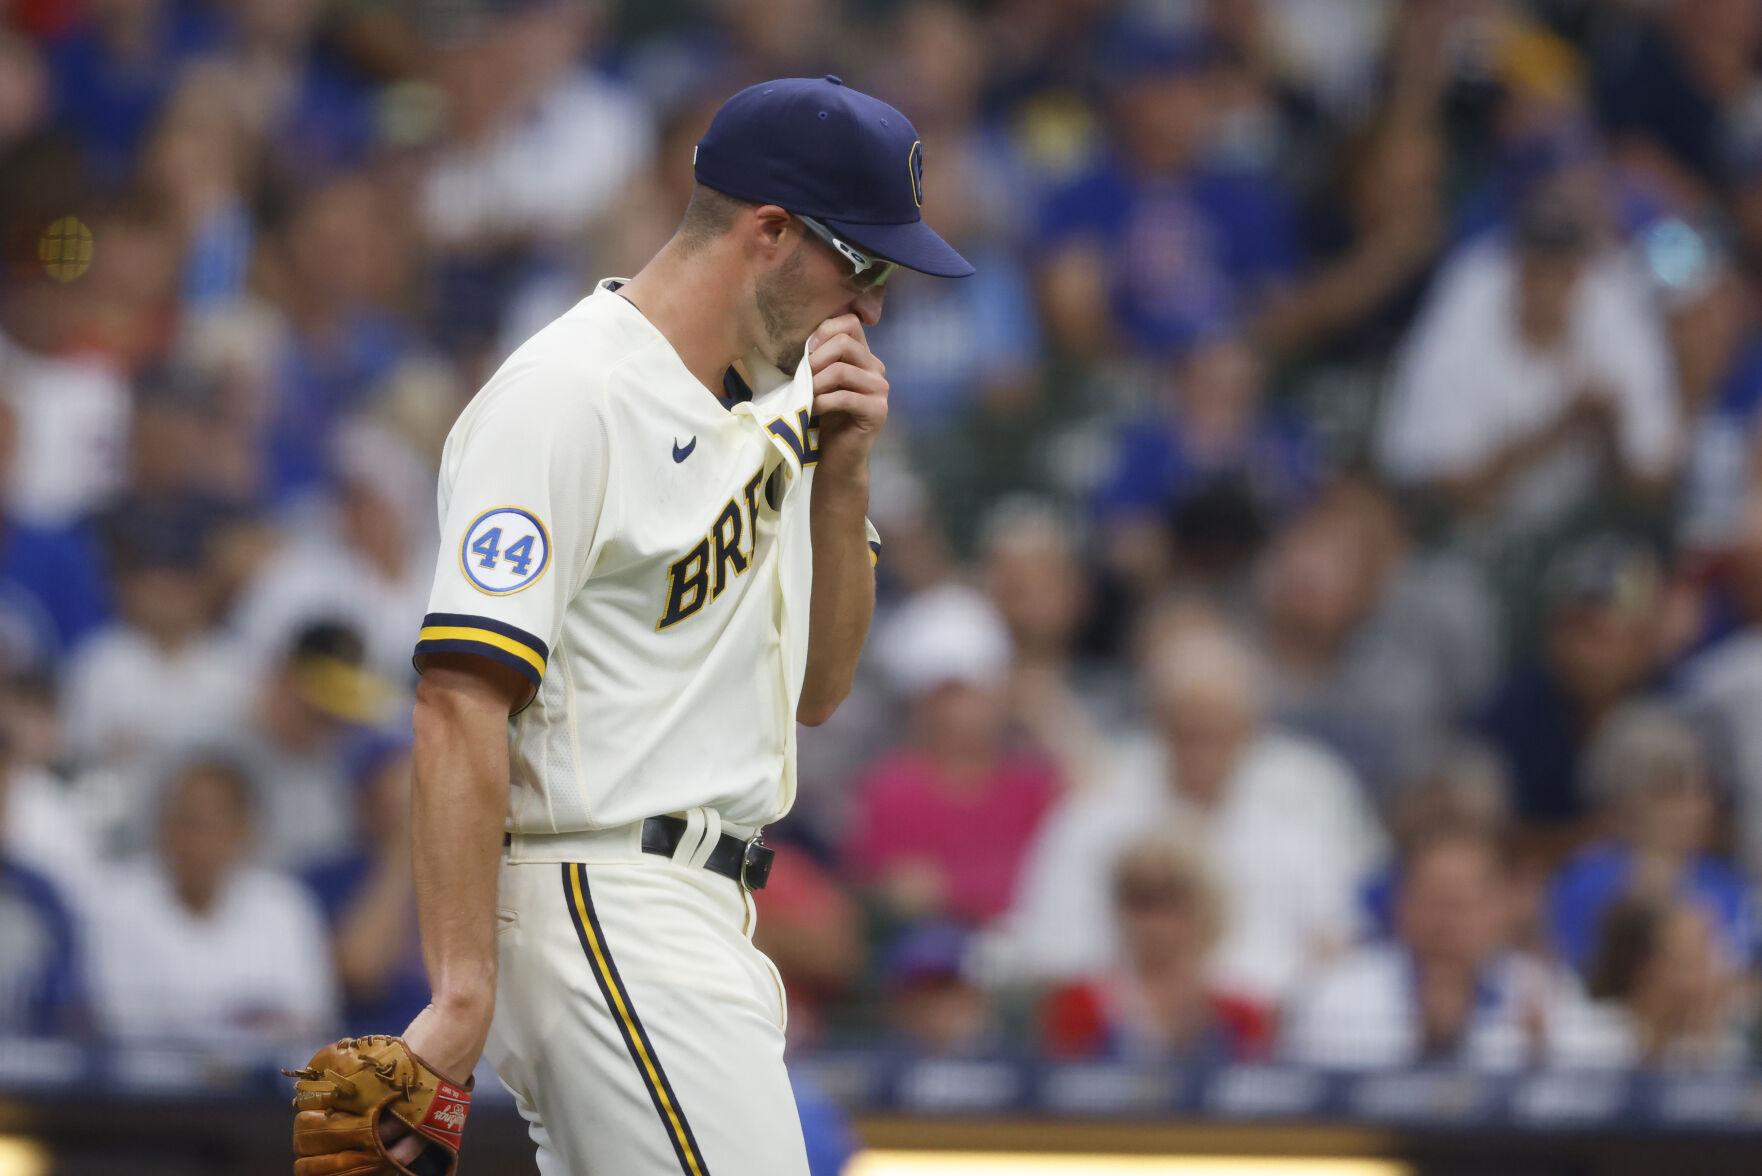 Milwaukee Brewers: Aaron Ashby To Undergo Shoulder Surgery